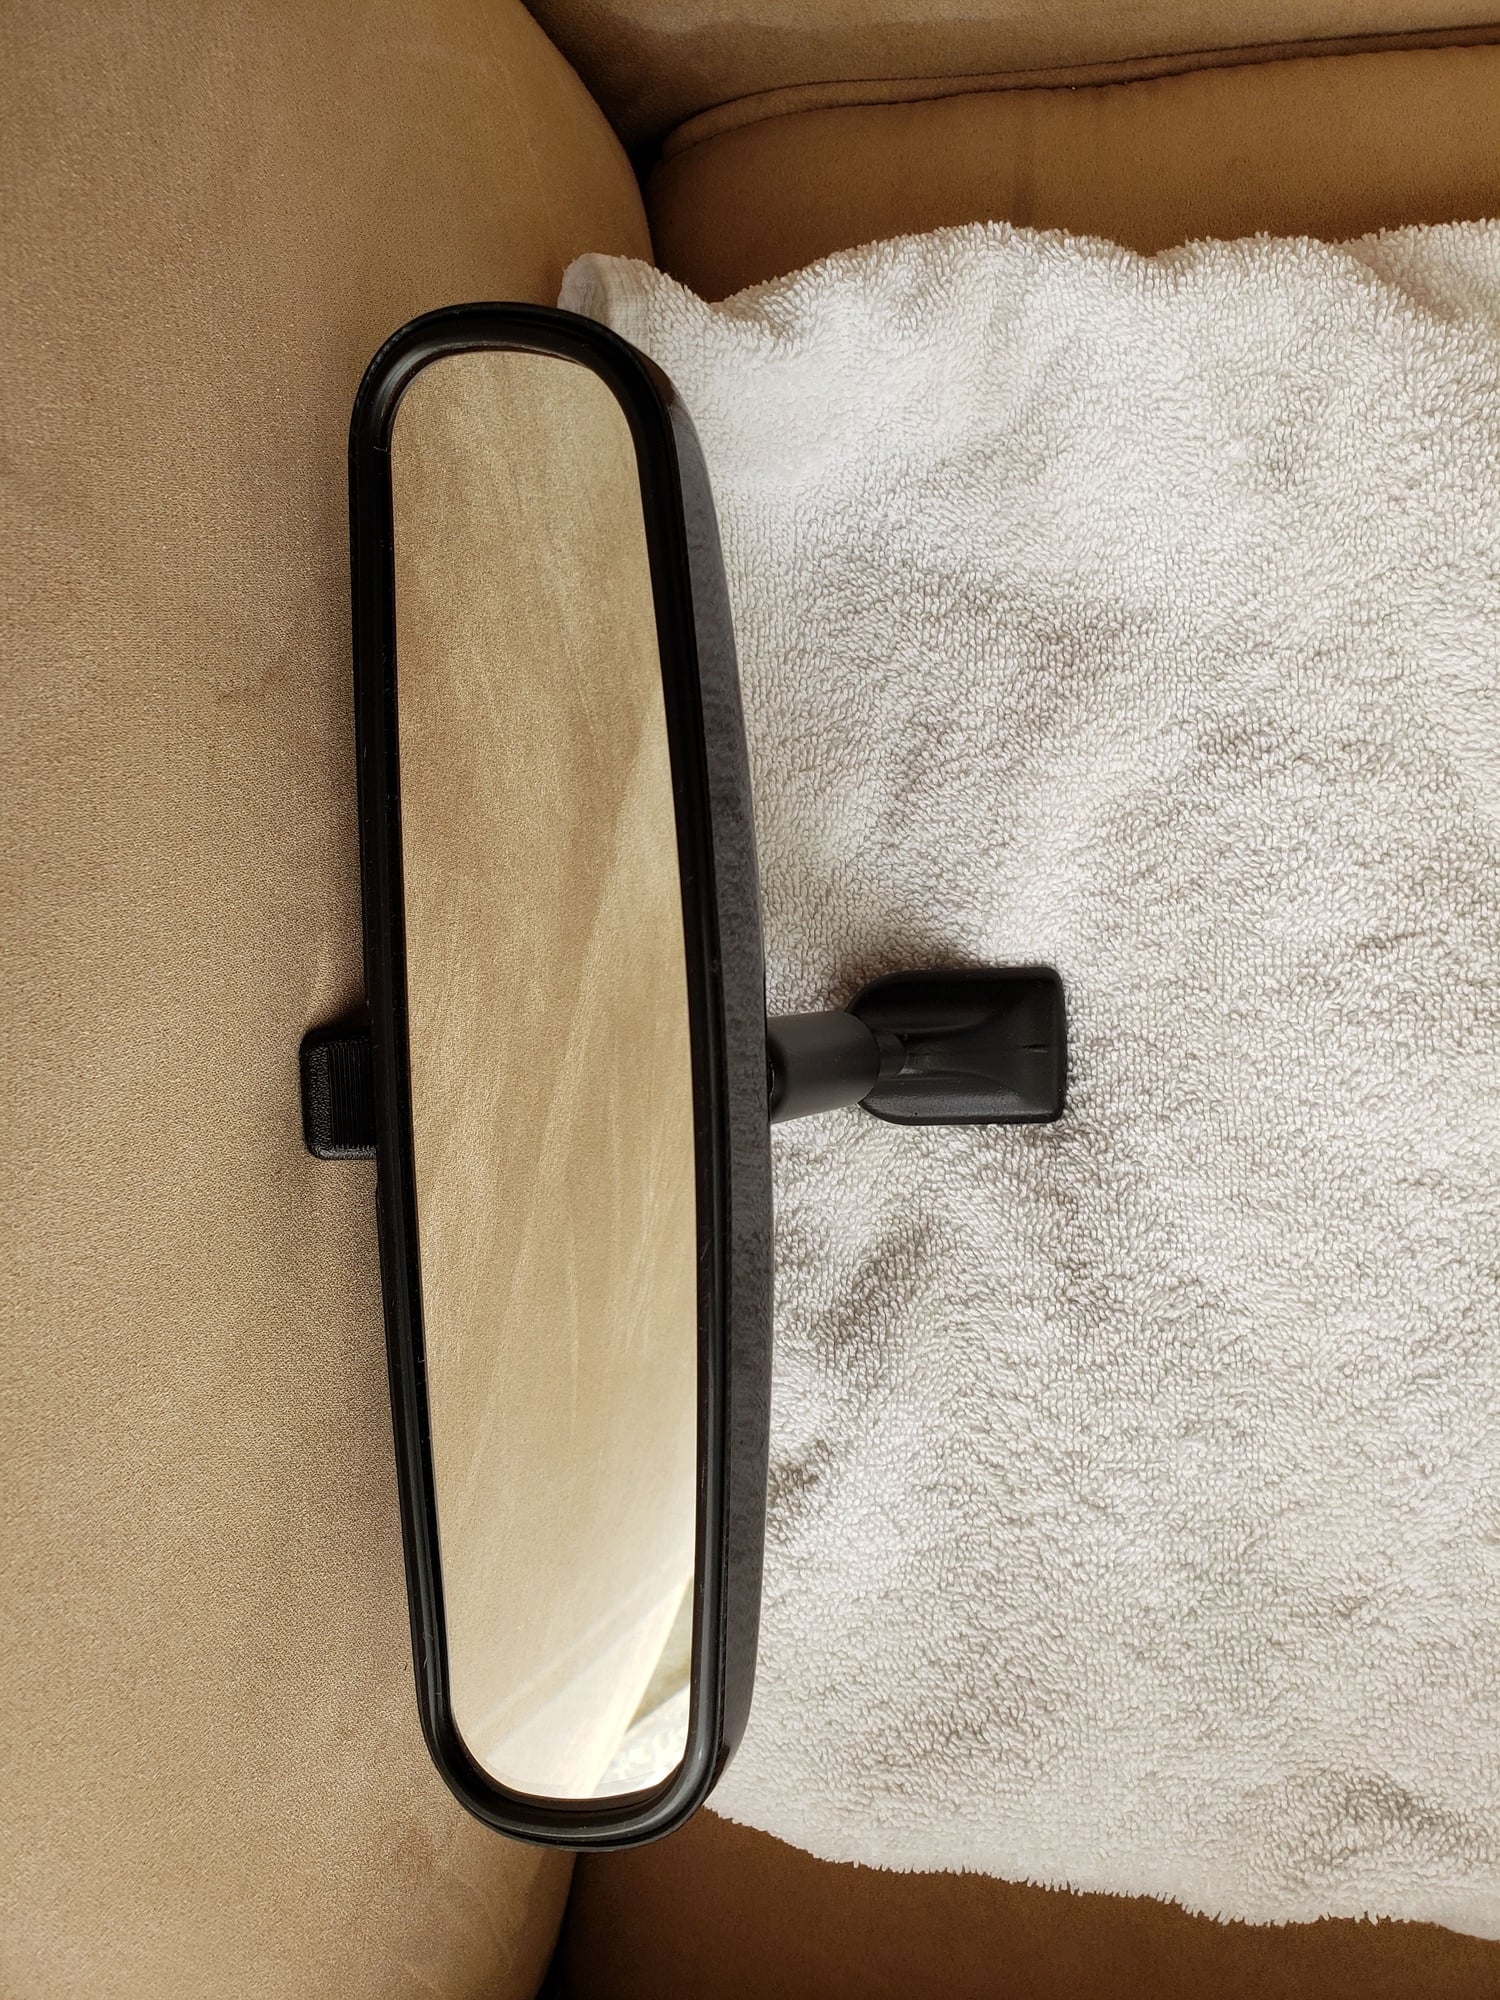 Interior/Upholstery - Mazdaspeed Rear View Mirror - Used - 1993 to 2002 Mazda RX-7 - 1998 to 2005 Mazda MX-5 Miata - 2004 to 2012 Mazda RX-8 - Edmonton, AB T5J2R7, Canada